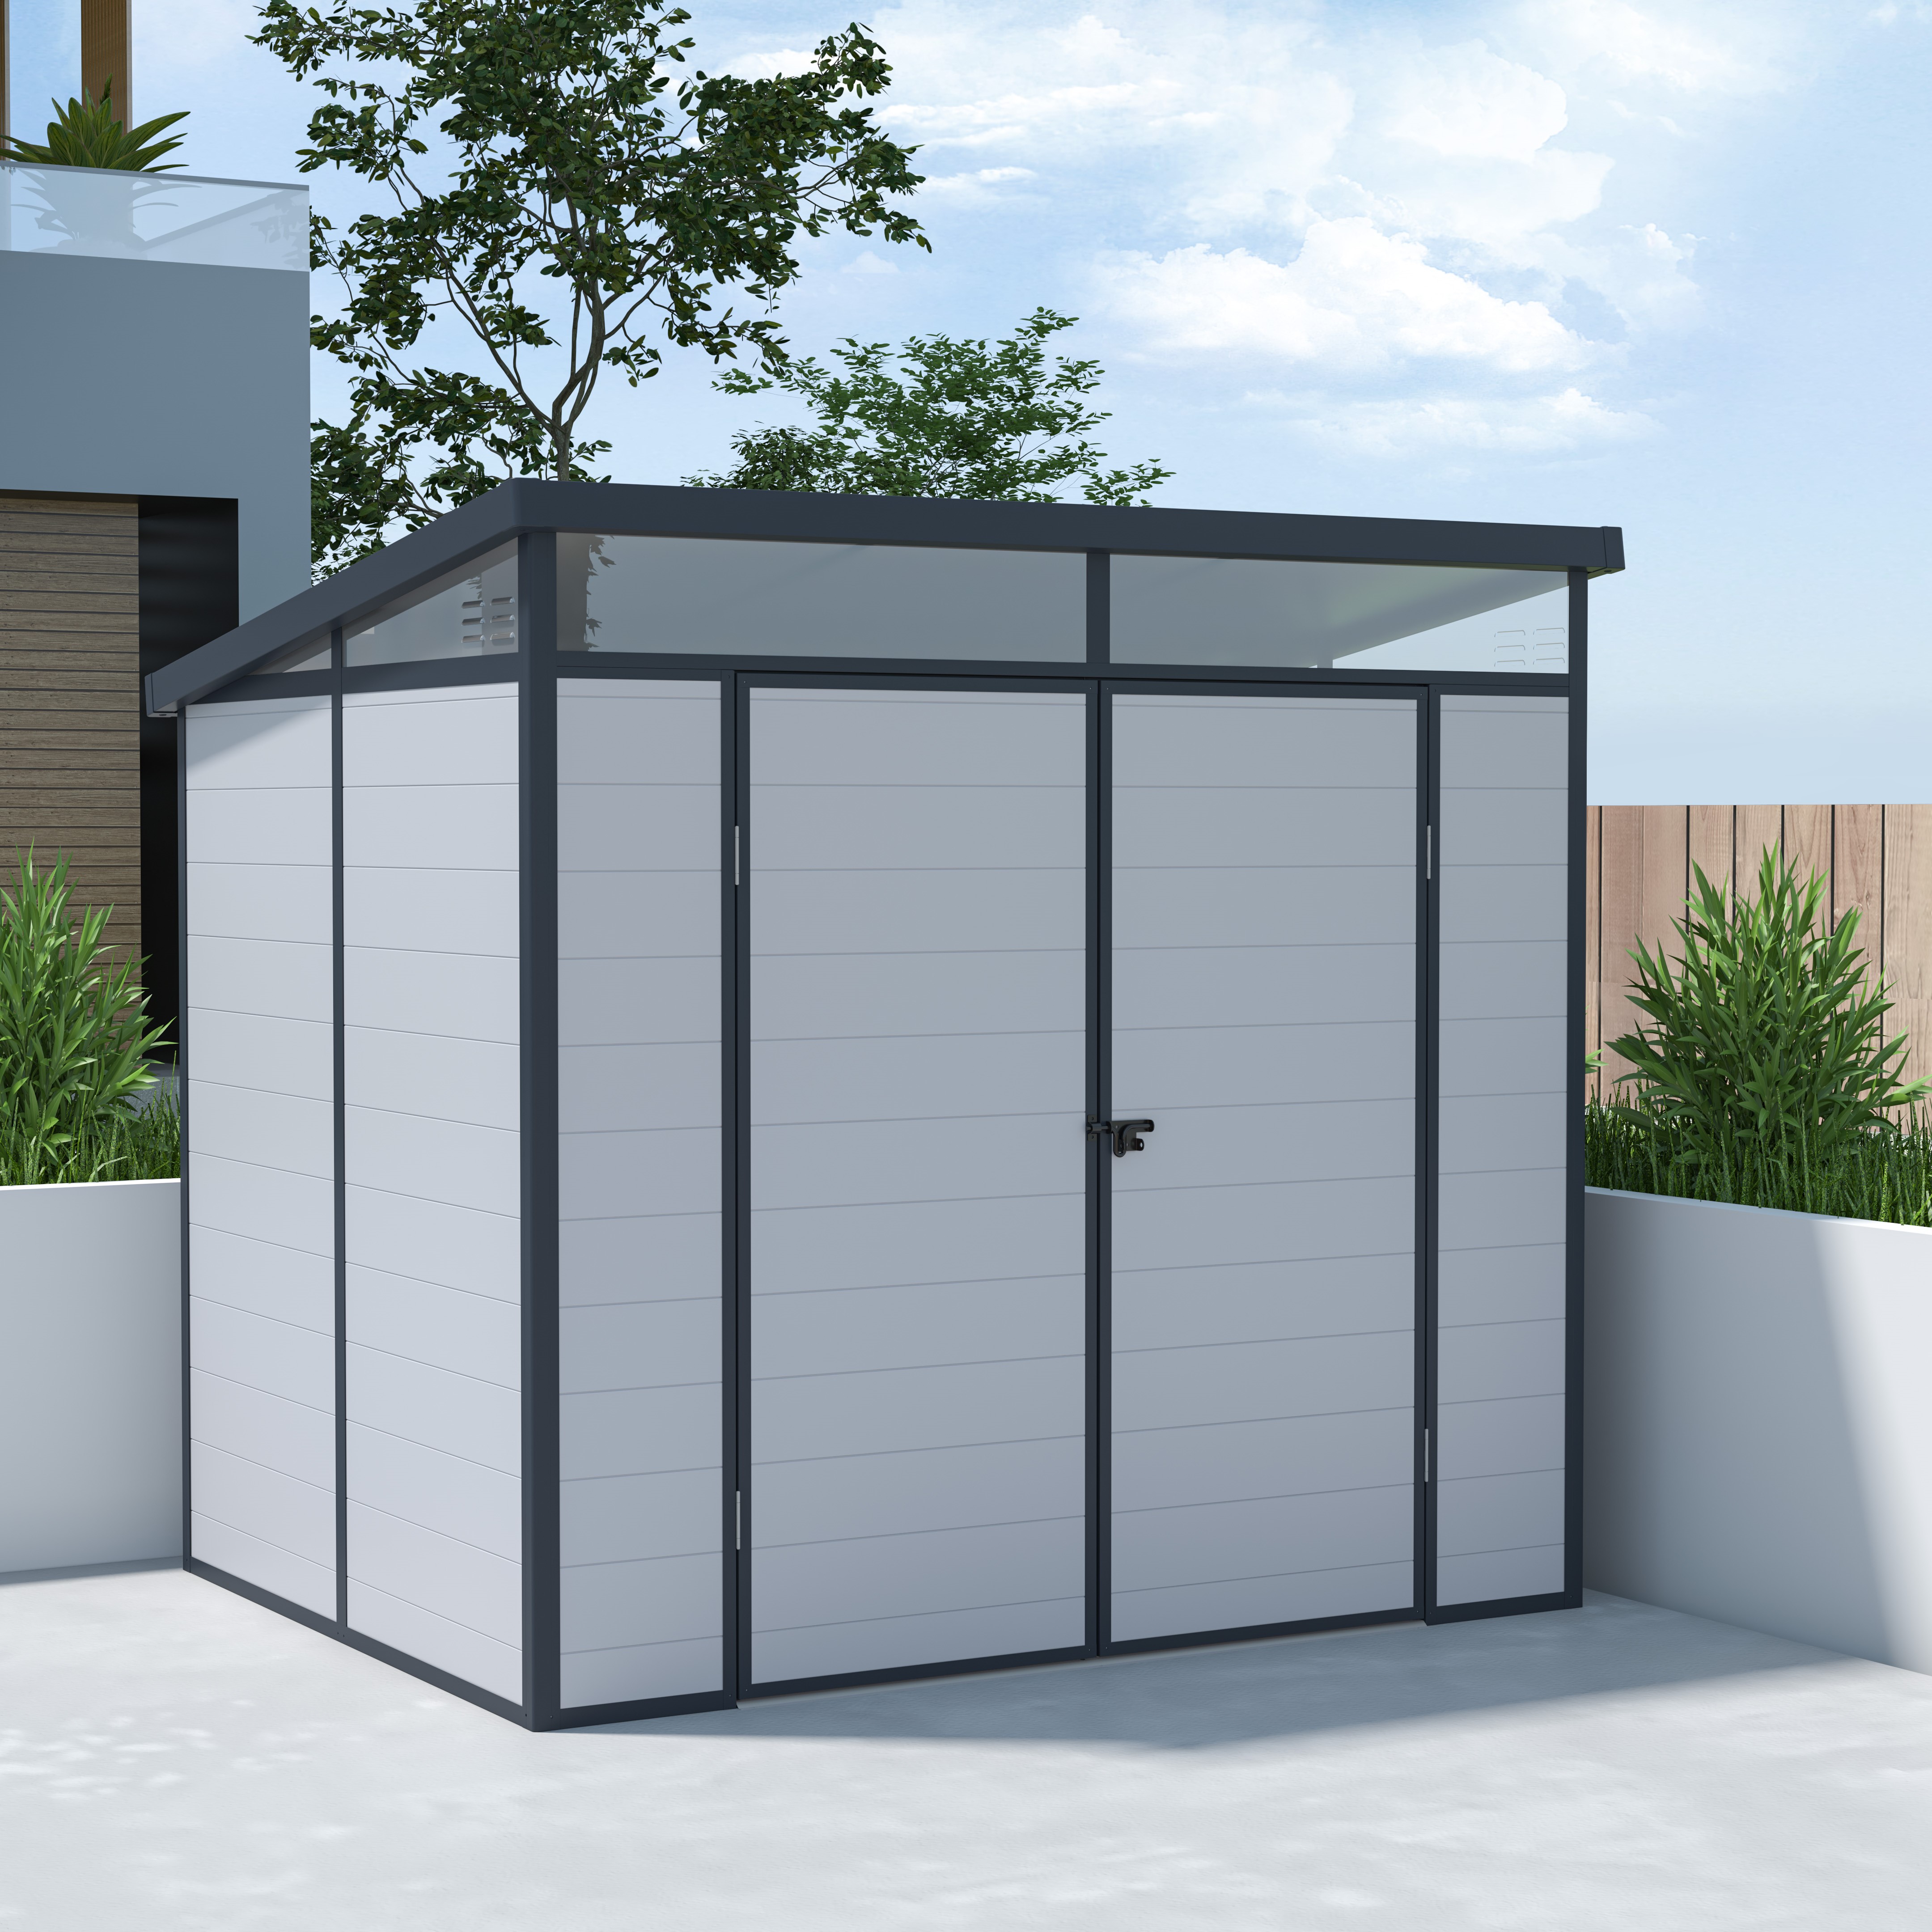 BillyOh Stafford Pent White Plastic Shed - 8x6 Grey